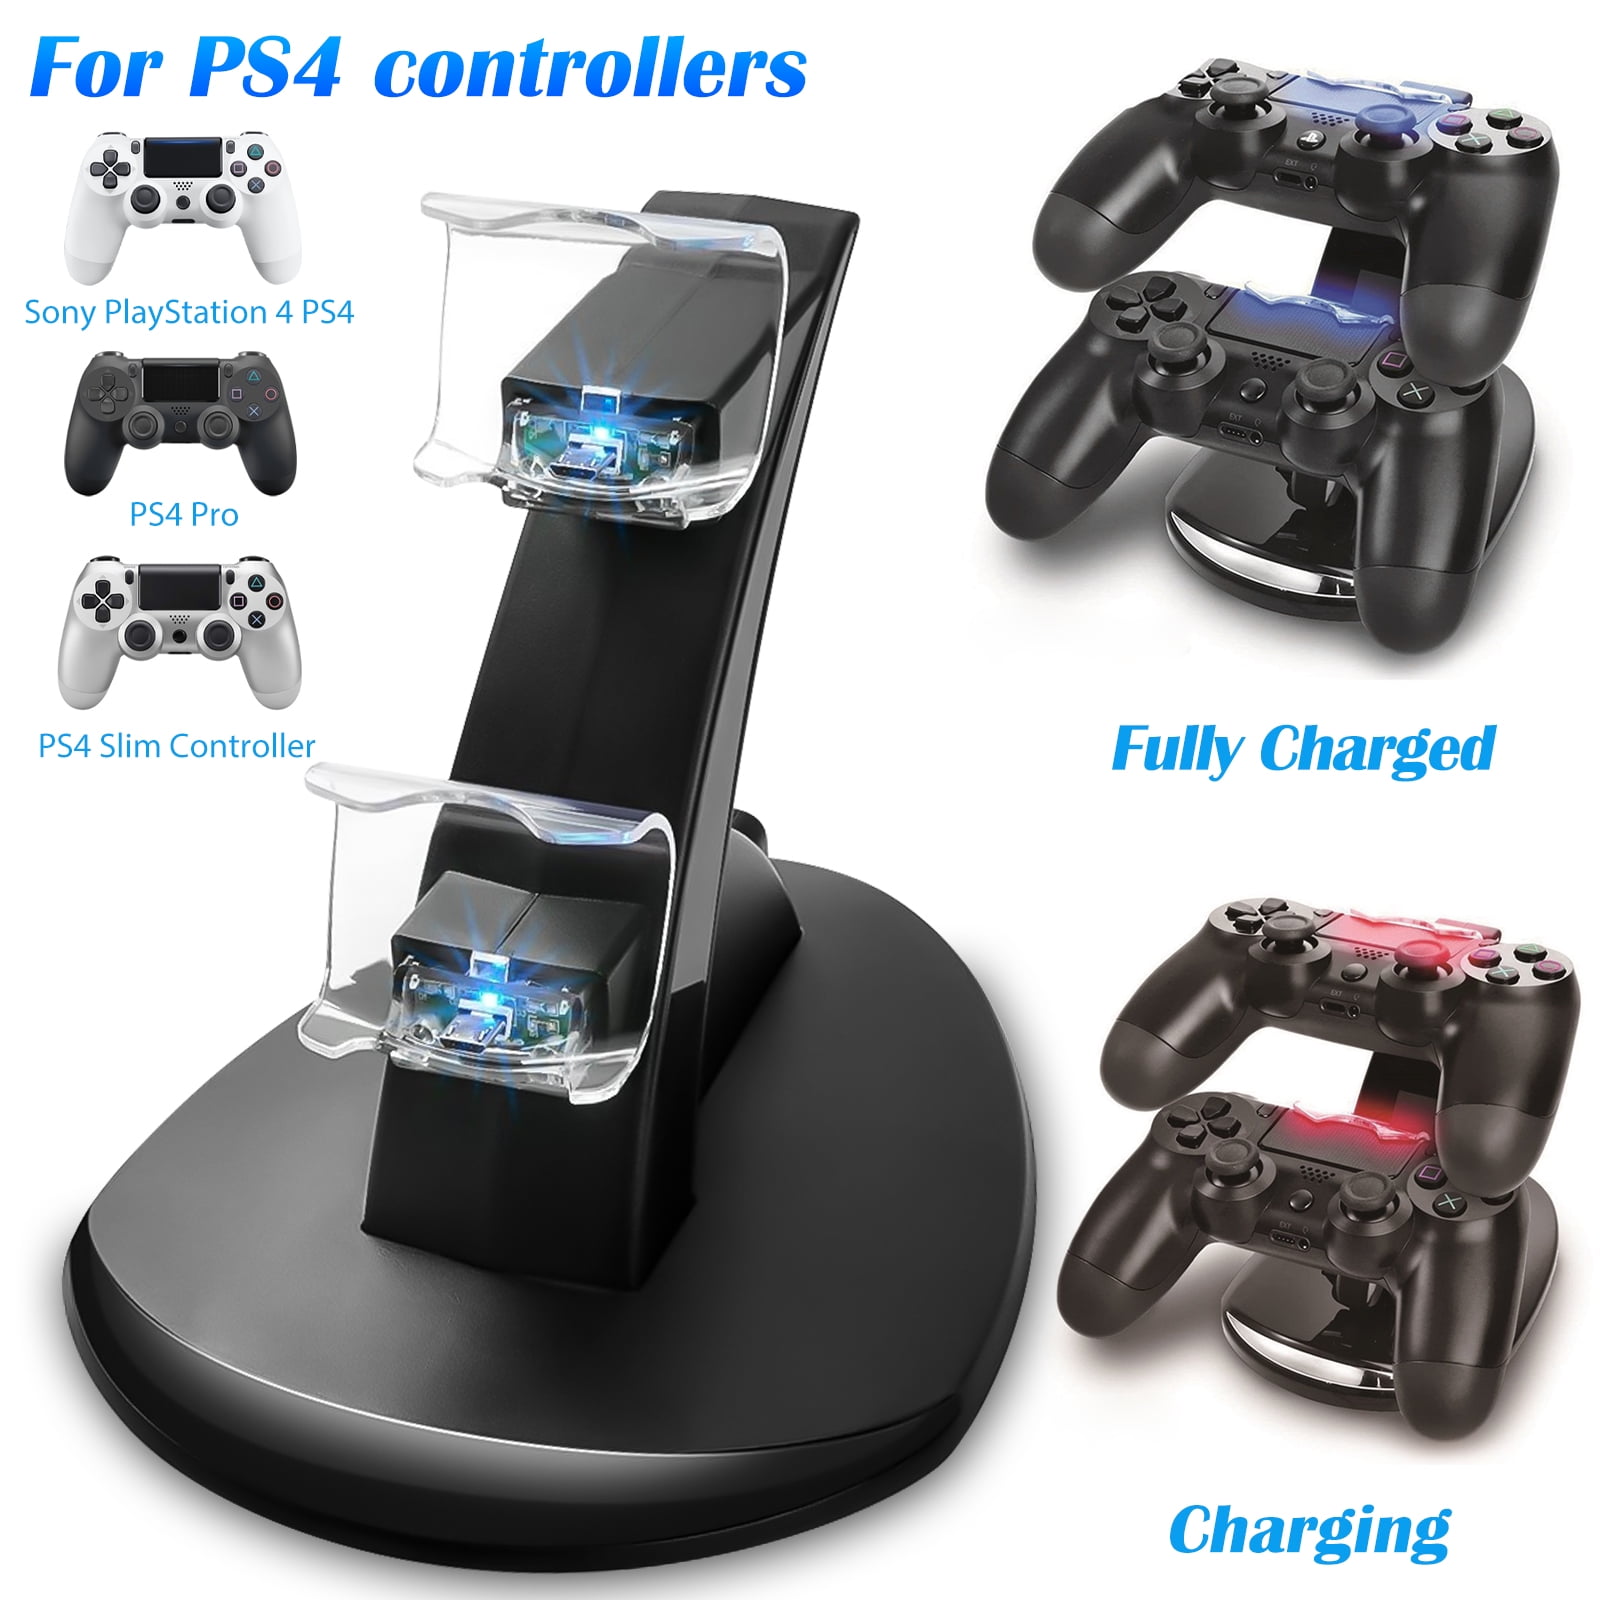 PS4 Pro Controller Docking Charge Cradle Stand PS4 Slim Insten Controller Charger For PS4 Dual USB Fast Charger Station Dock with LED Charging Status Indicator Compatible with Sony Playstation 4 